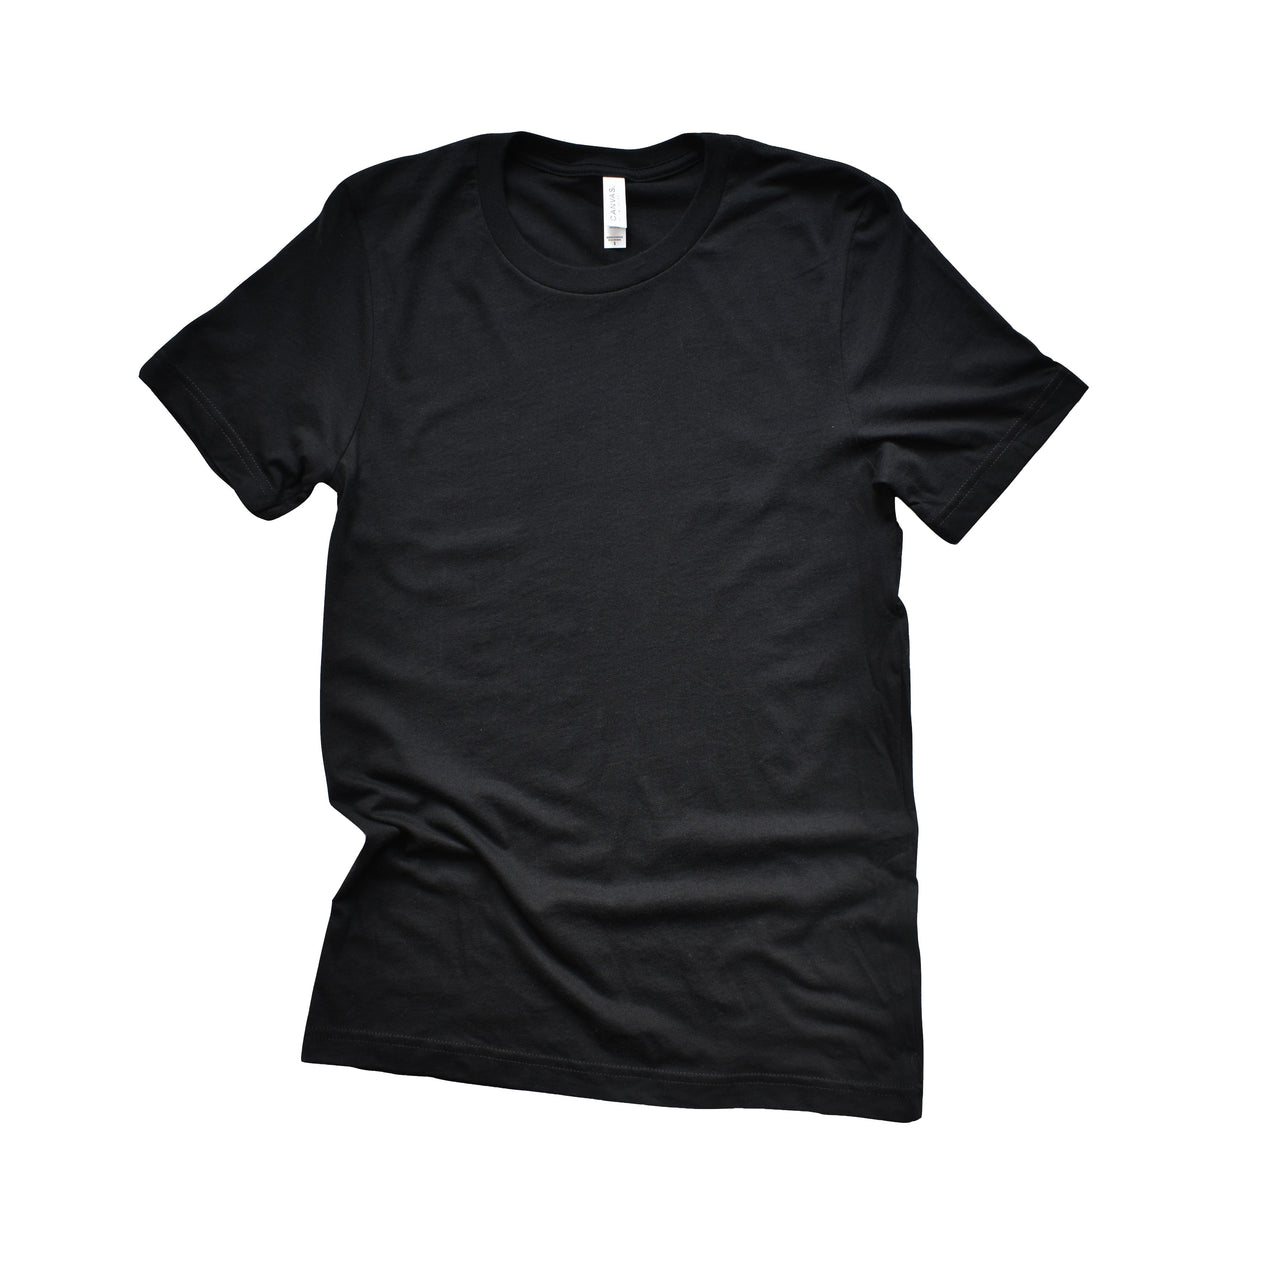 Youth - Bella Unisex Cotton/Poly Tee - (Design of the Week)